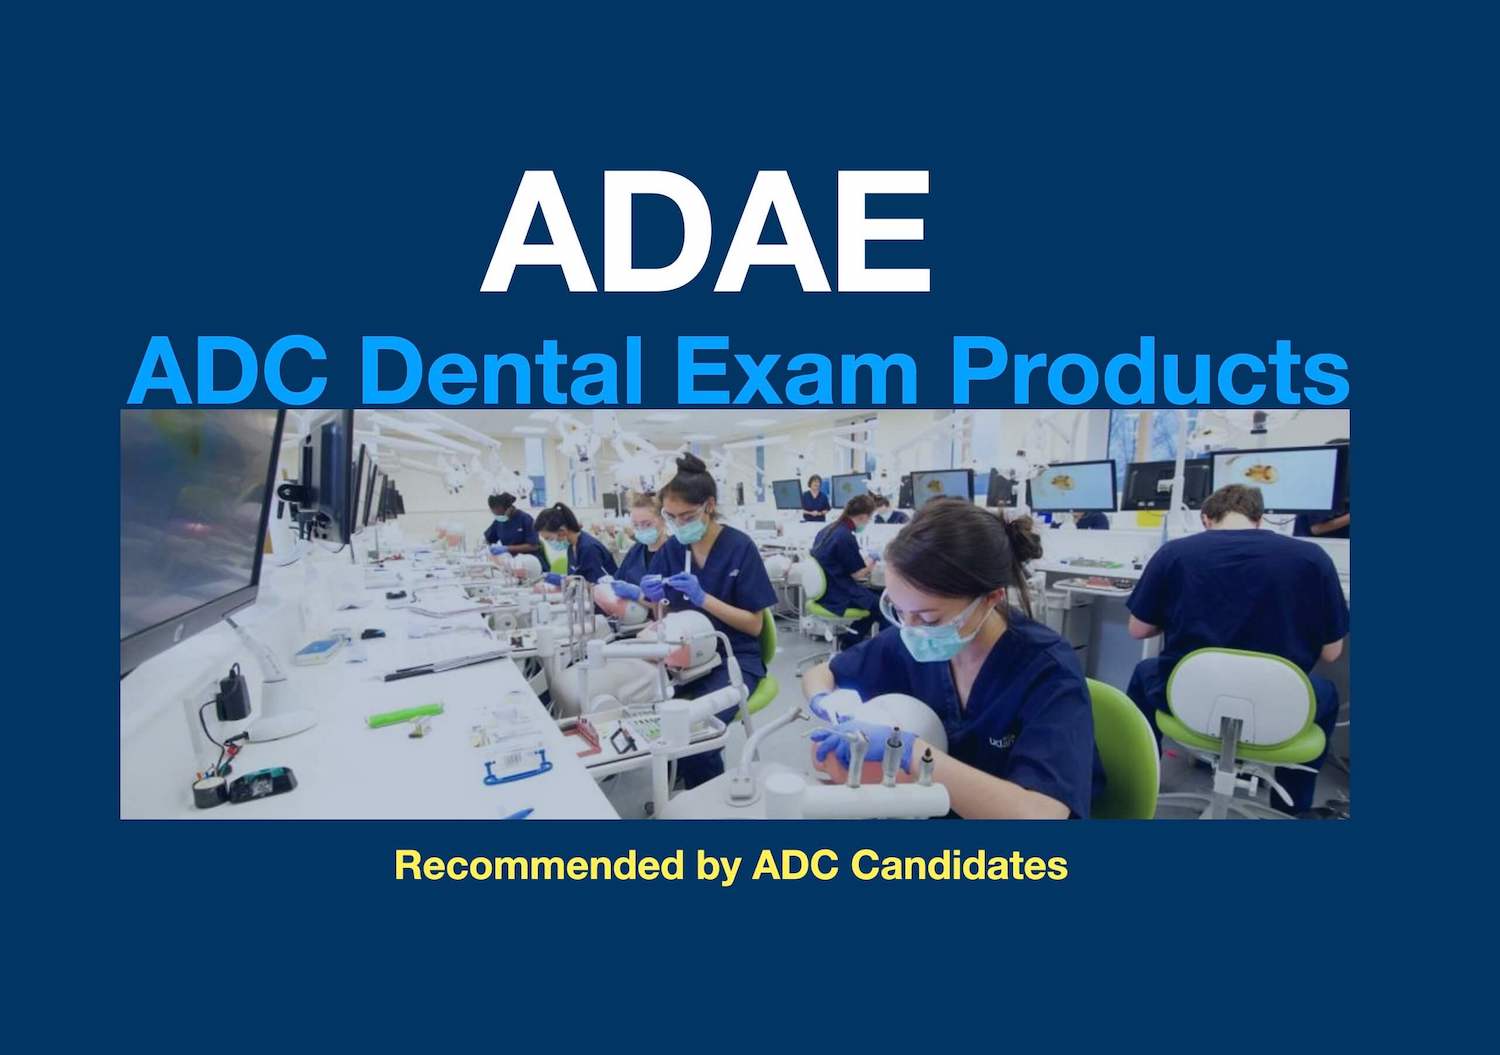 ADC dental exam best sellers products from ADAE International Dental Store with worldwide free air express shipping into your doorstep and one year warranty